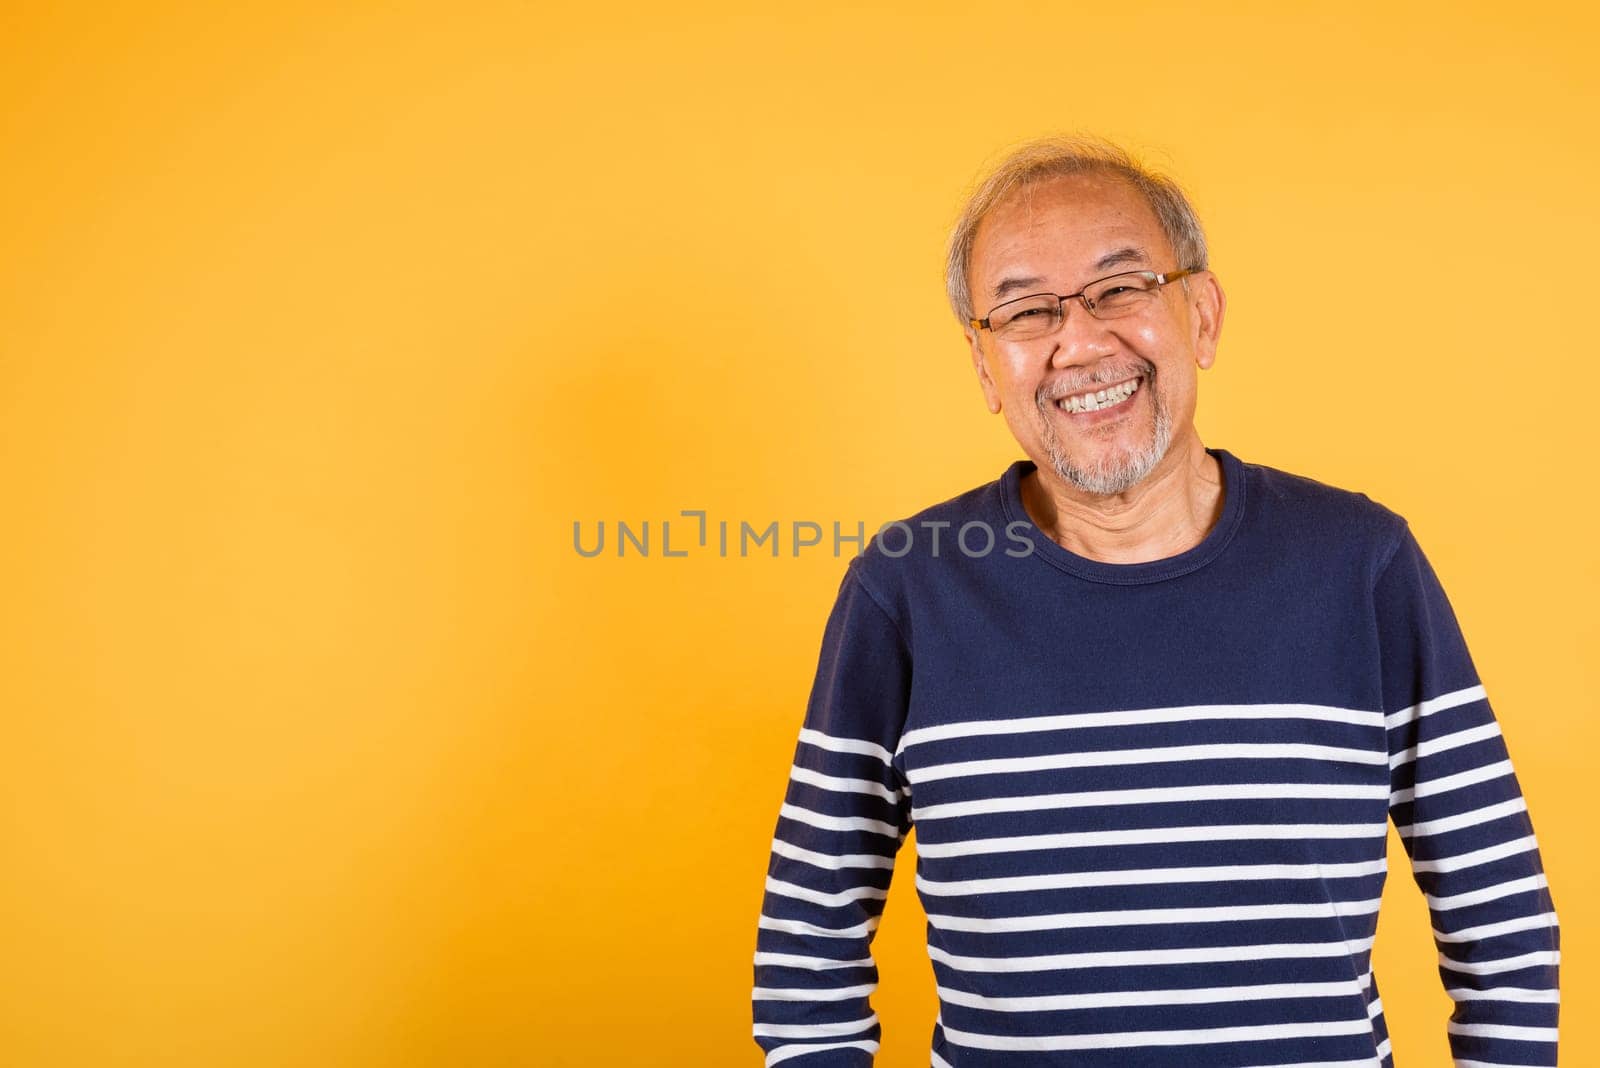 Portrait Asian smiling old man with glasses is smiling and wearing a blue striped sweater studio shot isolated yellow background. The image has a cheerful and positive mood, Senior man with grey hair